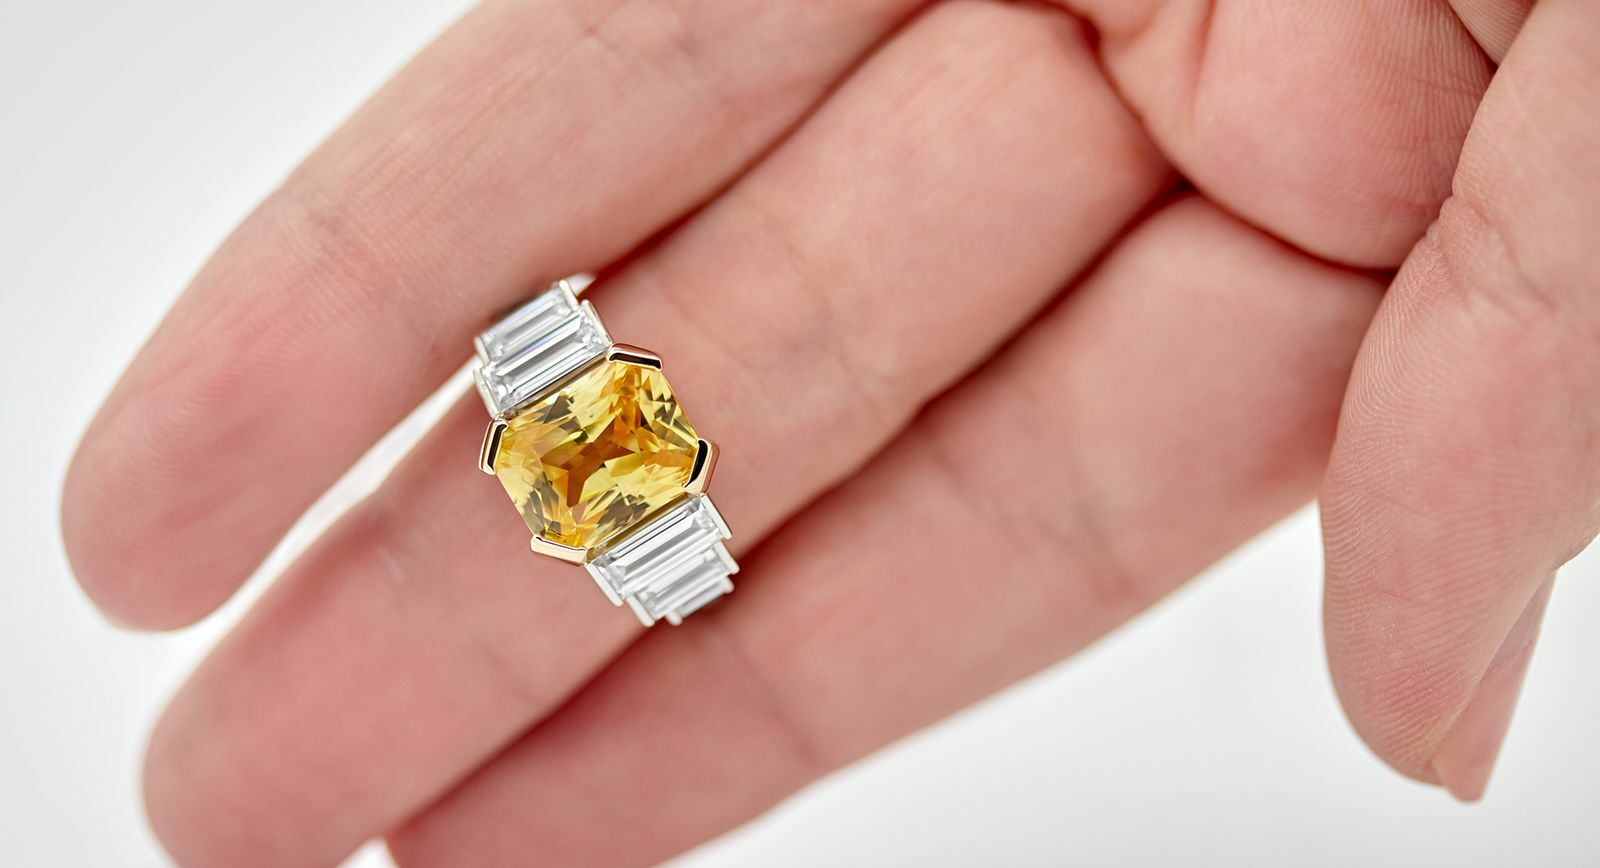 Taylor & Hart bespoke engagement ring with a 6.60 carat radiant-cut yellow sapphire and baguette-cut diamonds 